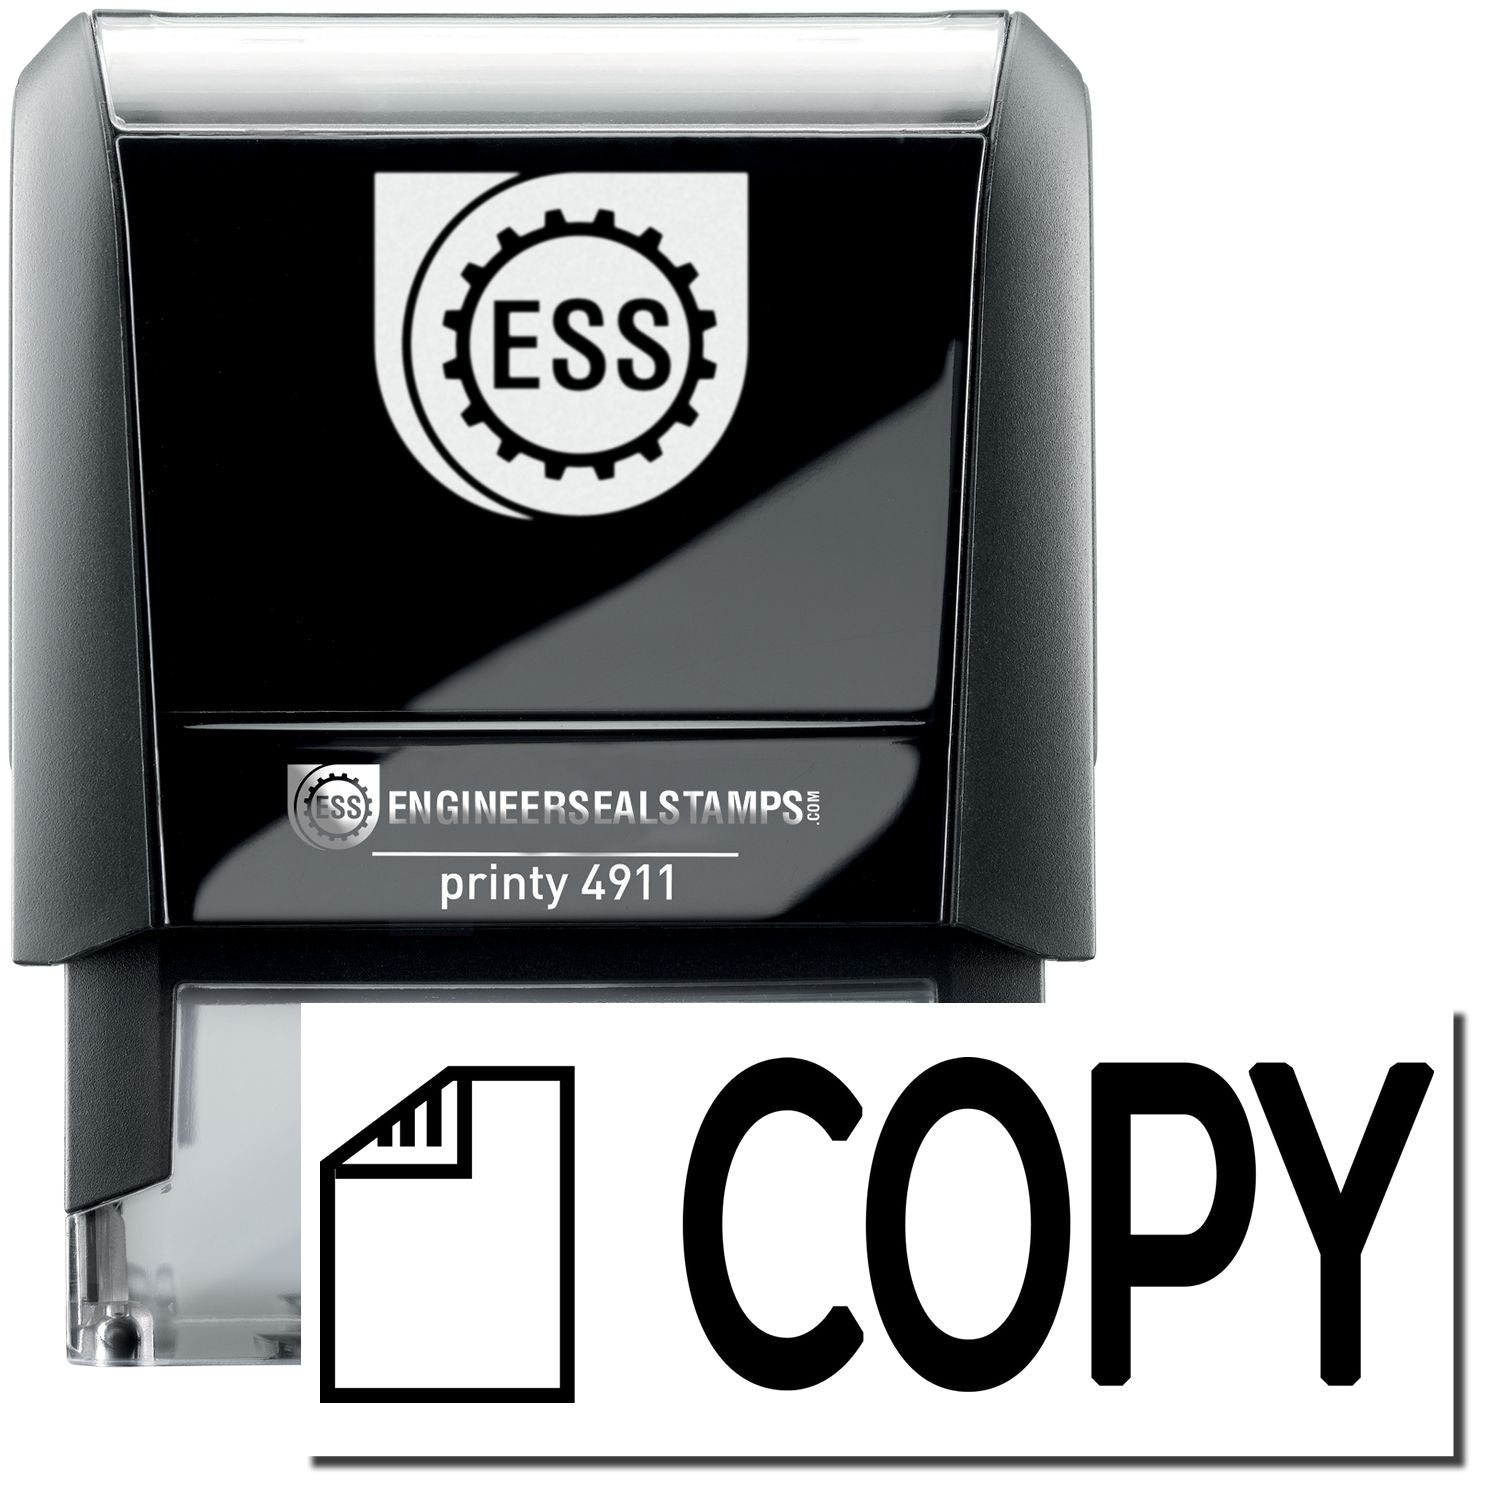 A self-inking stamp with a stamped image showing how the text "COPY" in bold font and a small image of a letter on the left is displayed after stamping.